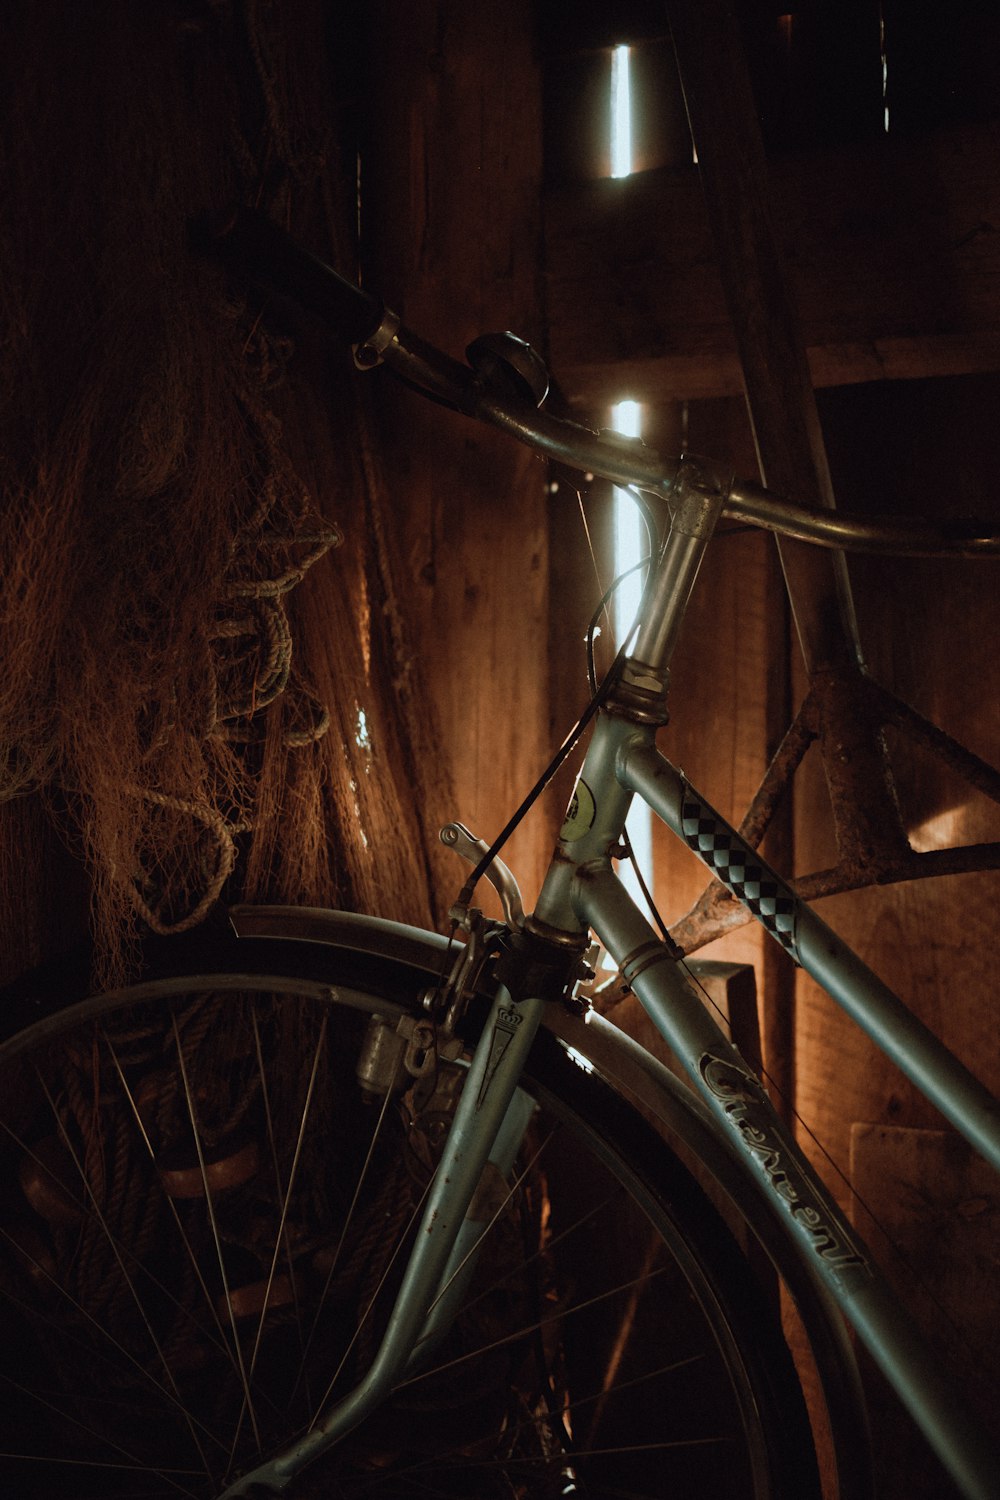 a close up of a bike parked in a barn